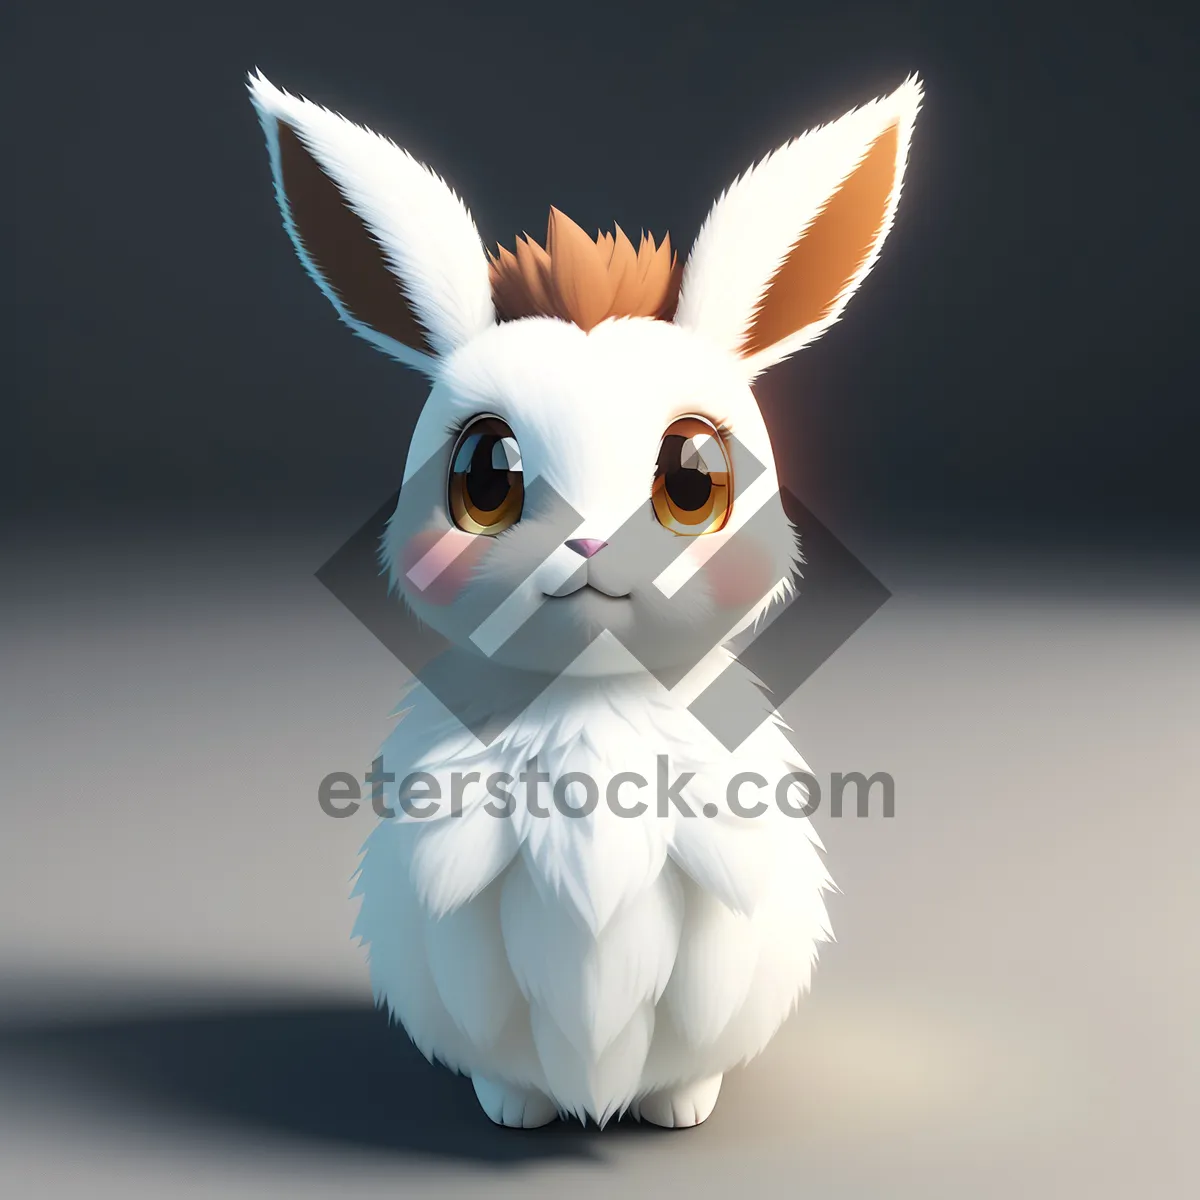 Picture of Cute Cartoon Bunny with Fluffy Ears